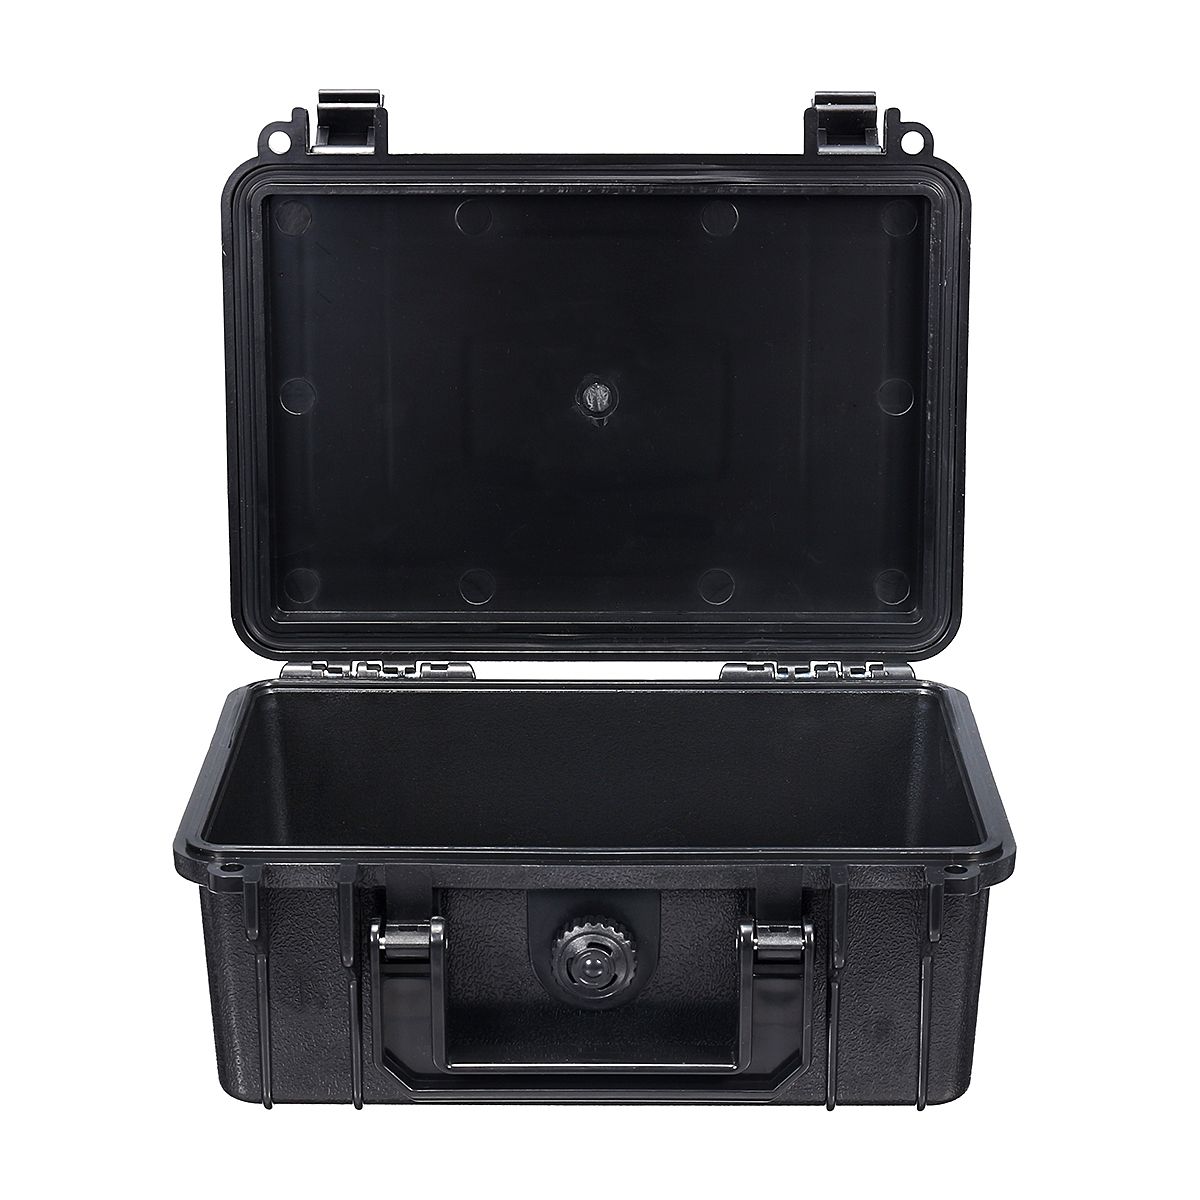 210x165x85mm-Waterproof-Hard-Carry-Camera-Lens-Photography-Tool-Case-Bag-Storage-Box-with-Sponge-1351189